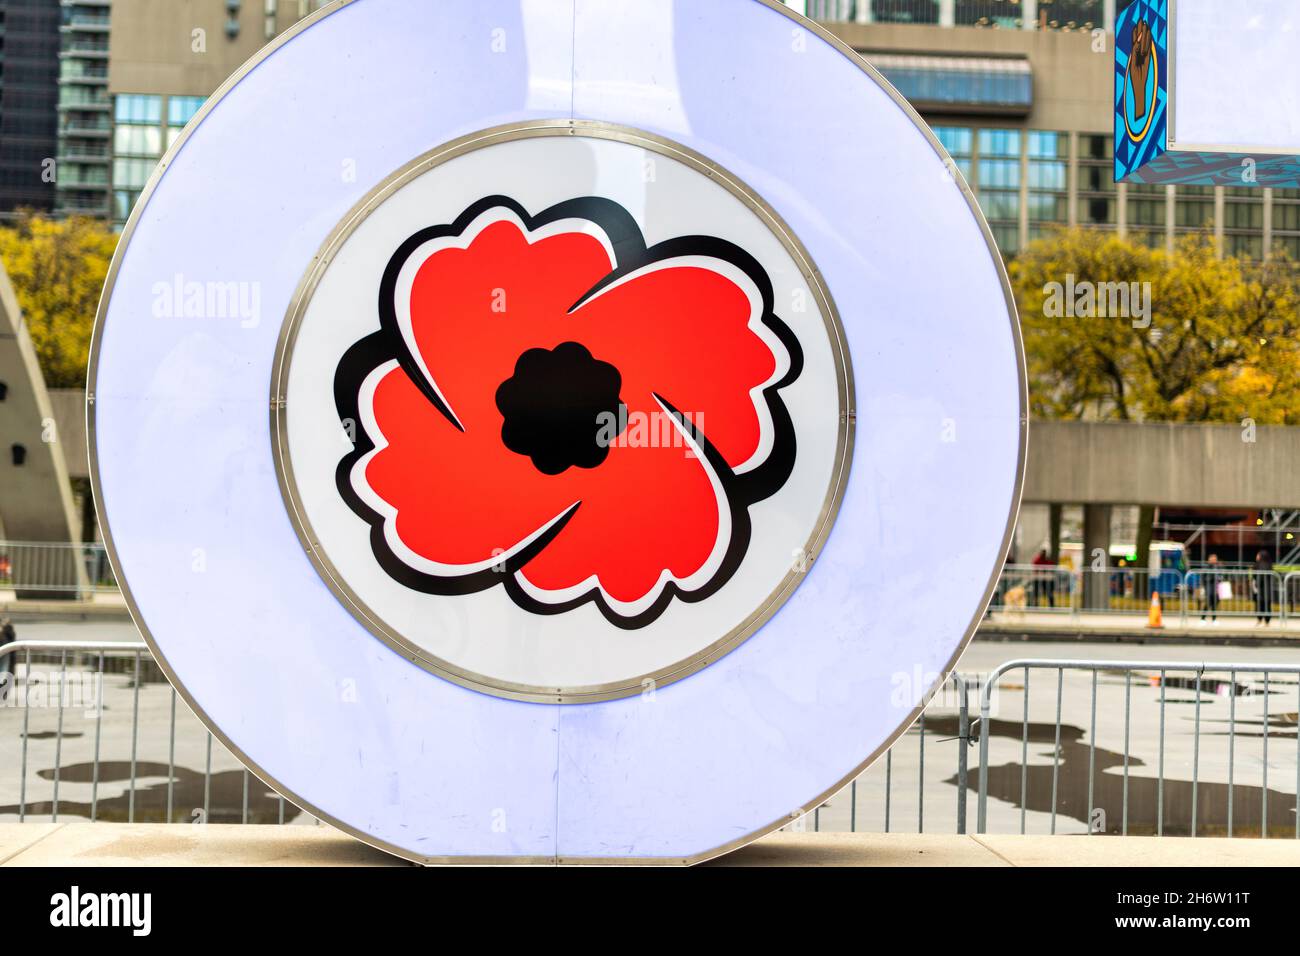 The poppy flower symbol decorating the 3d art of the Toronto sign as part of the Memorial Day celebrations.Nov. 18, 2021 Stock Photo